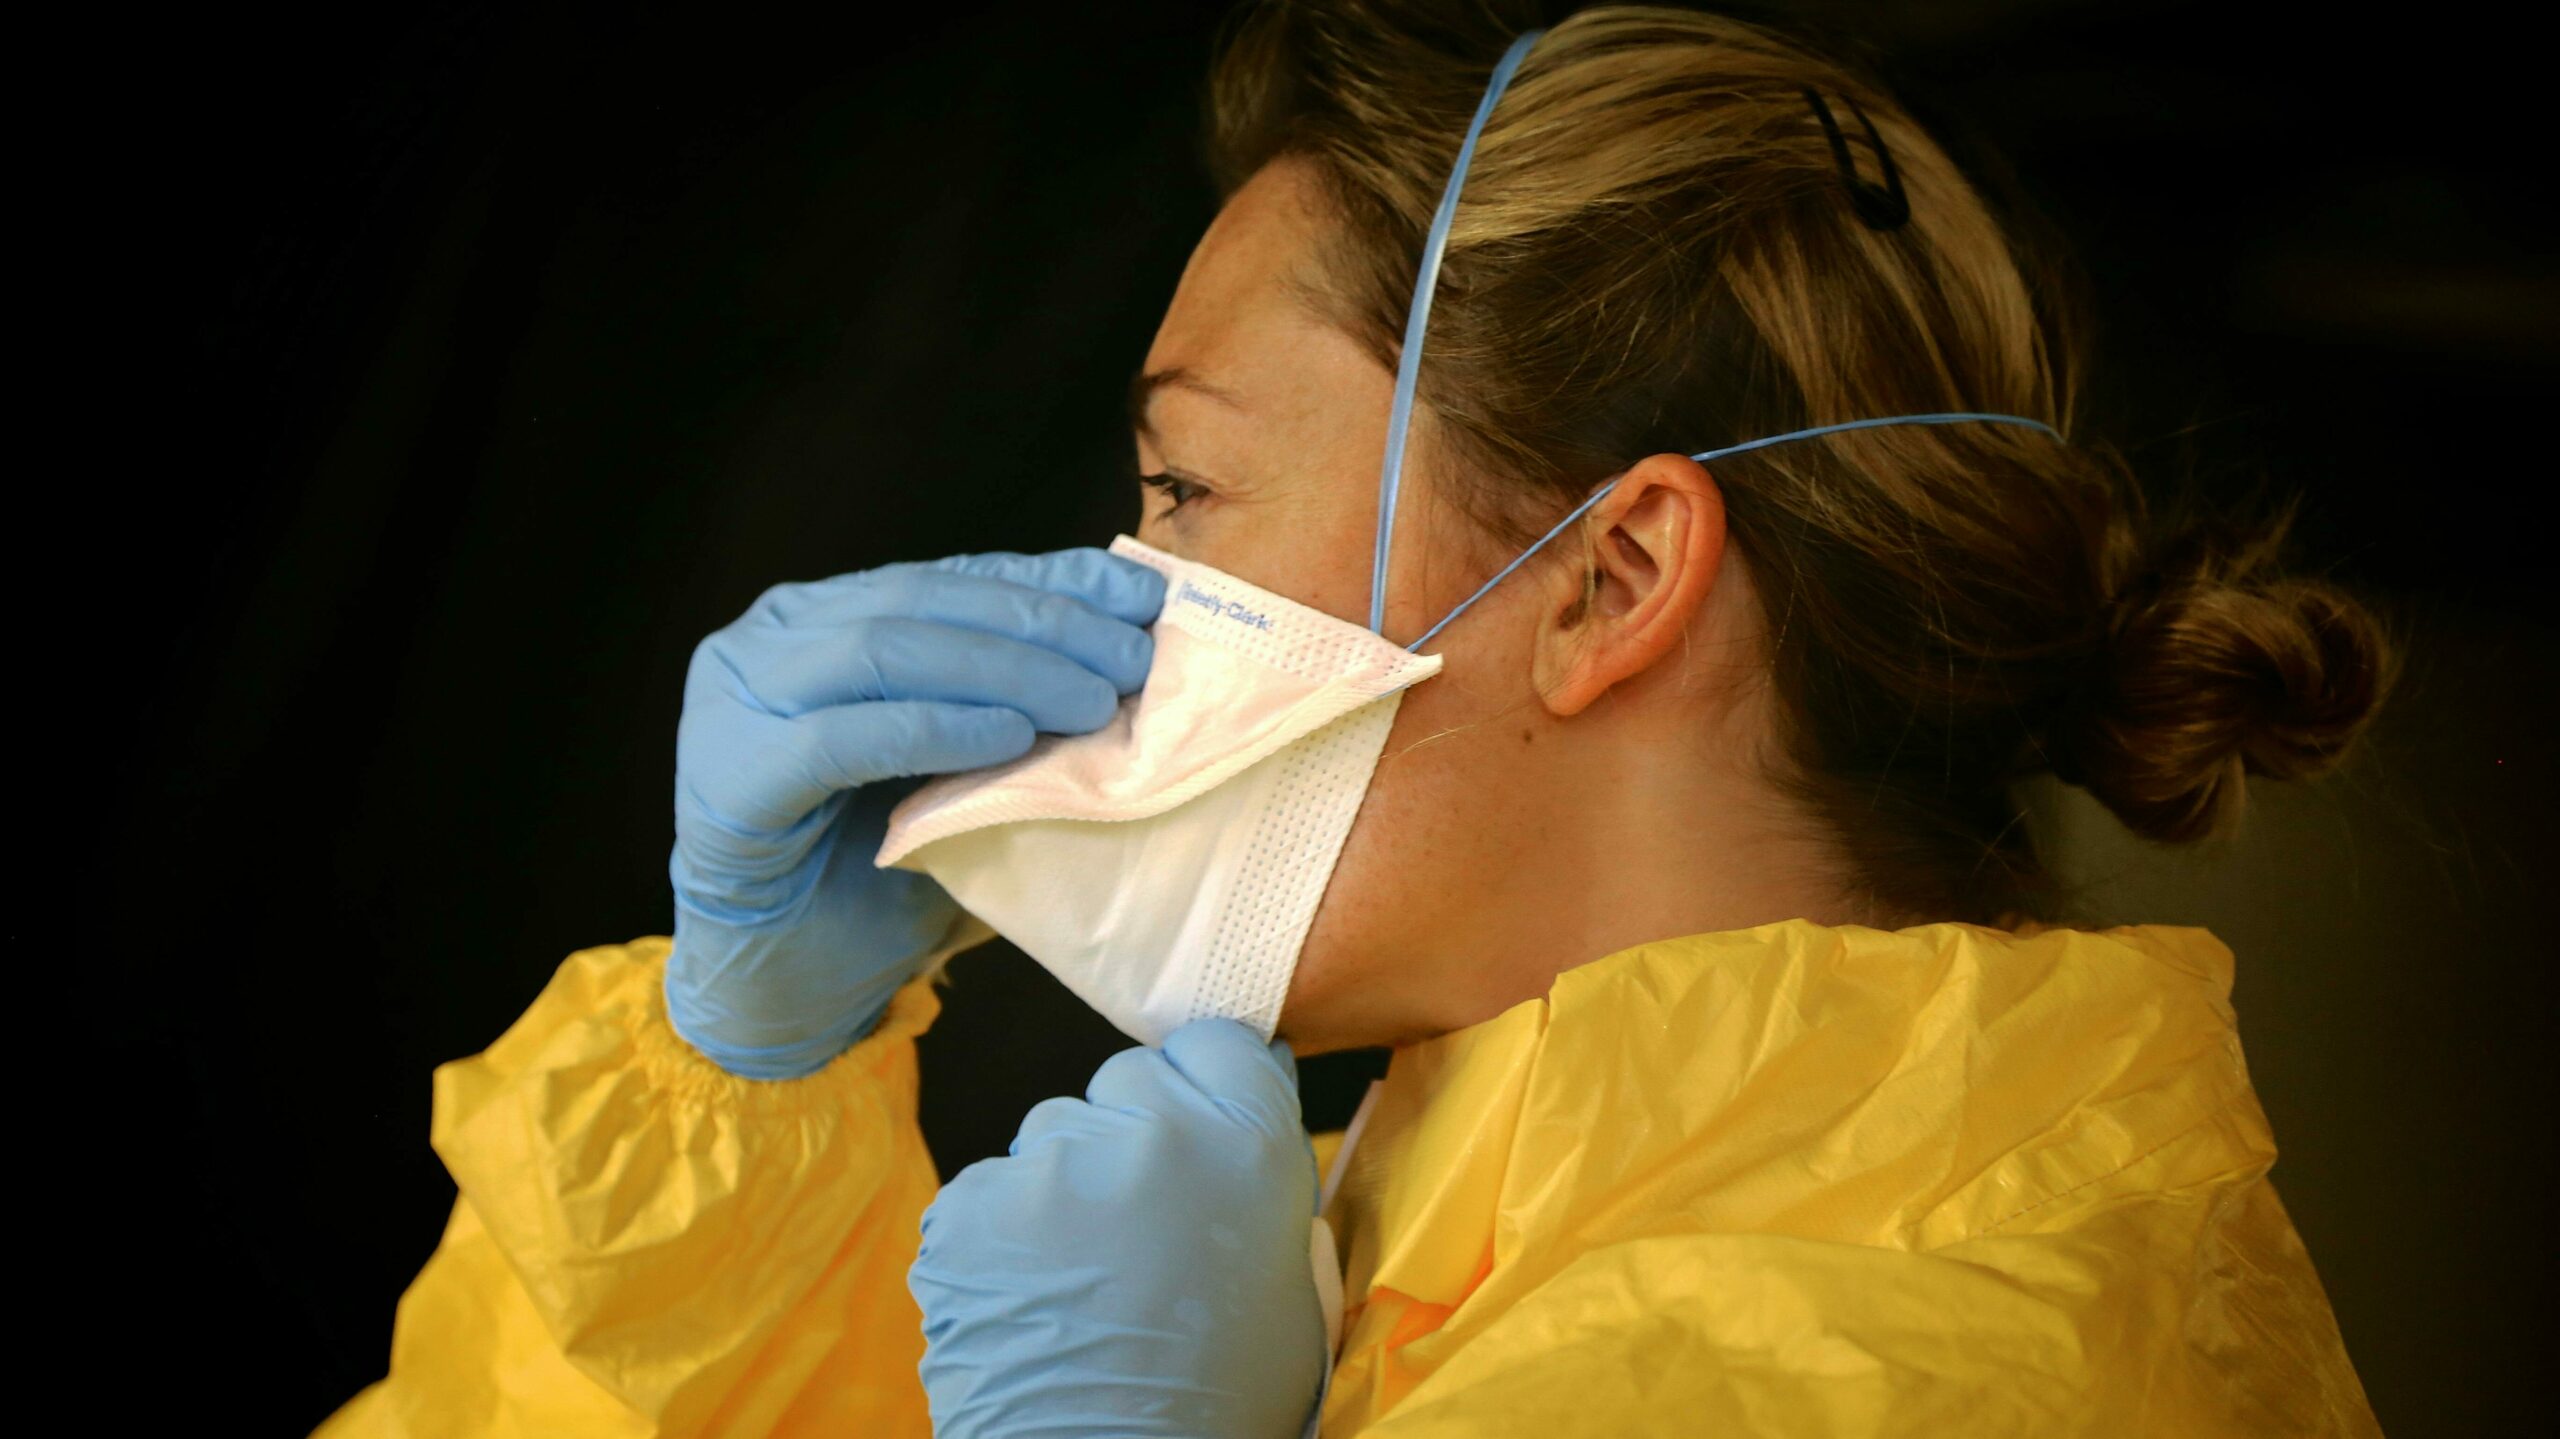 A person wearing PPE- in yellow smock, blue gloves, and a white mask